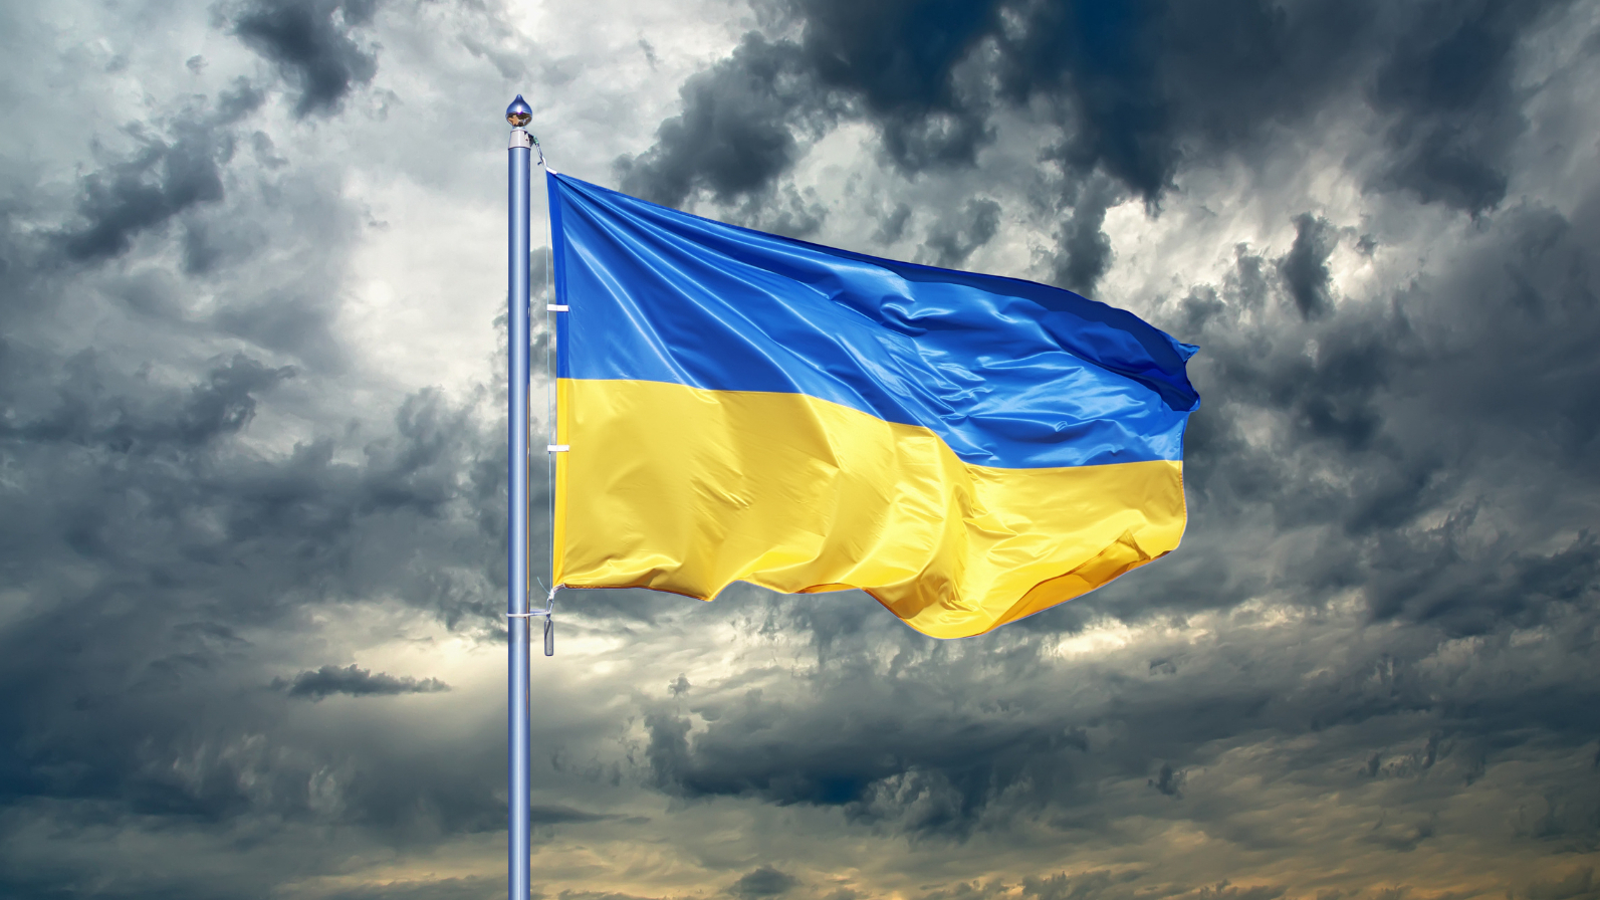 Ukraine game developers speak out in face of Russian invasion |  